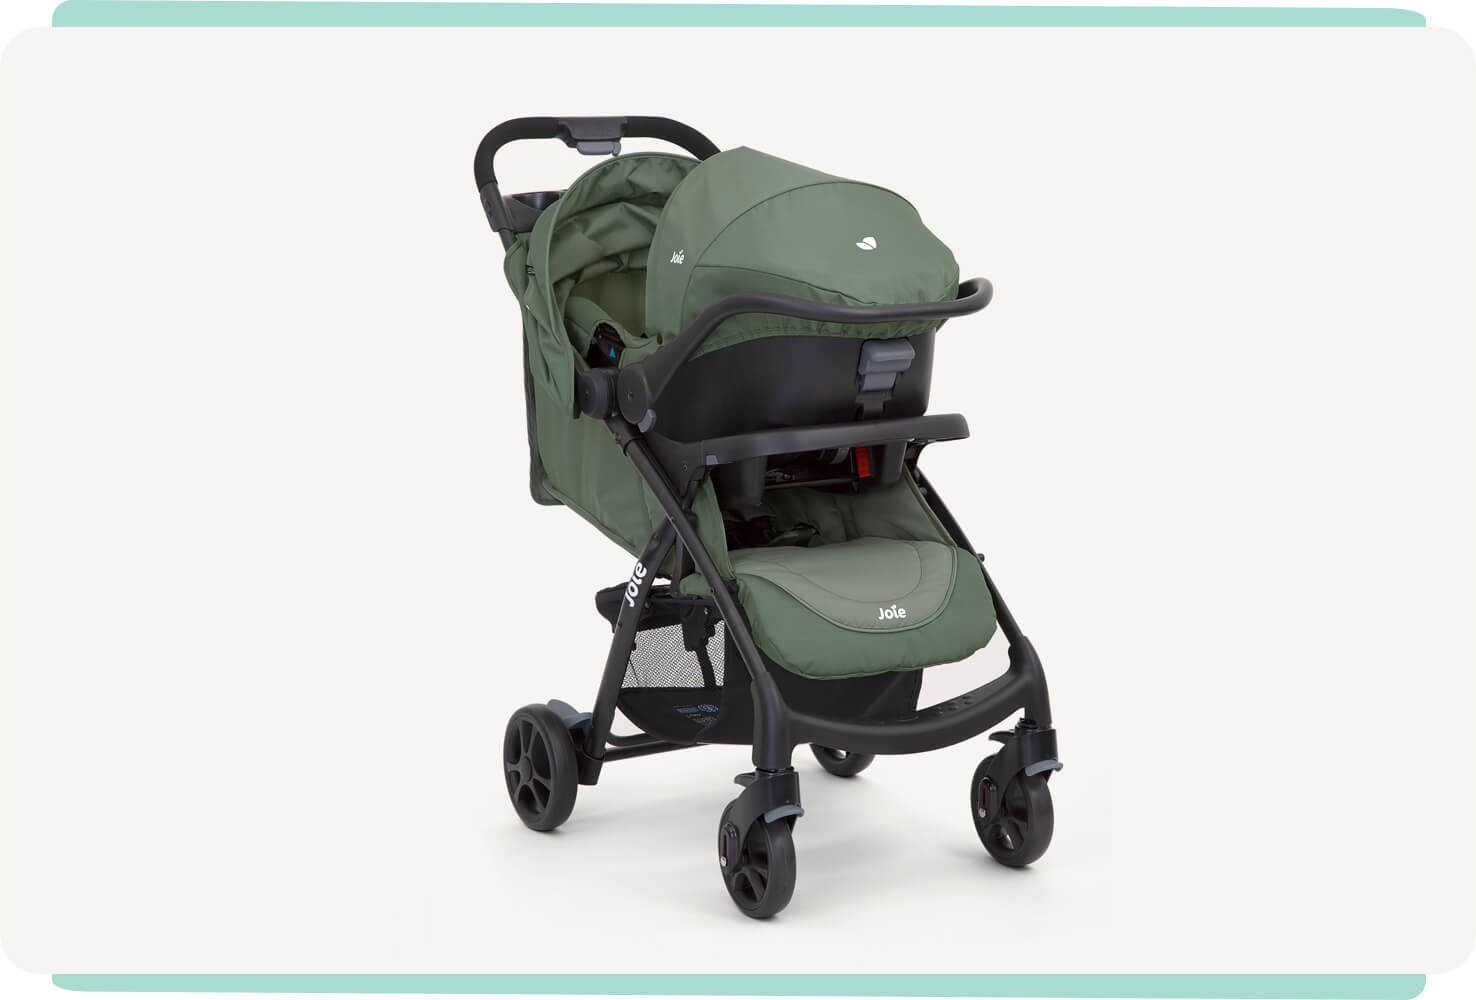   Light green Joie muze lx stroller at a right angle with infant carrier.